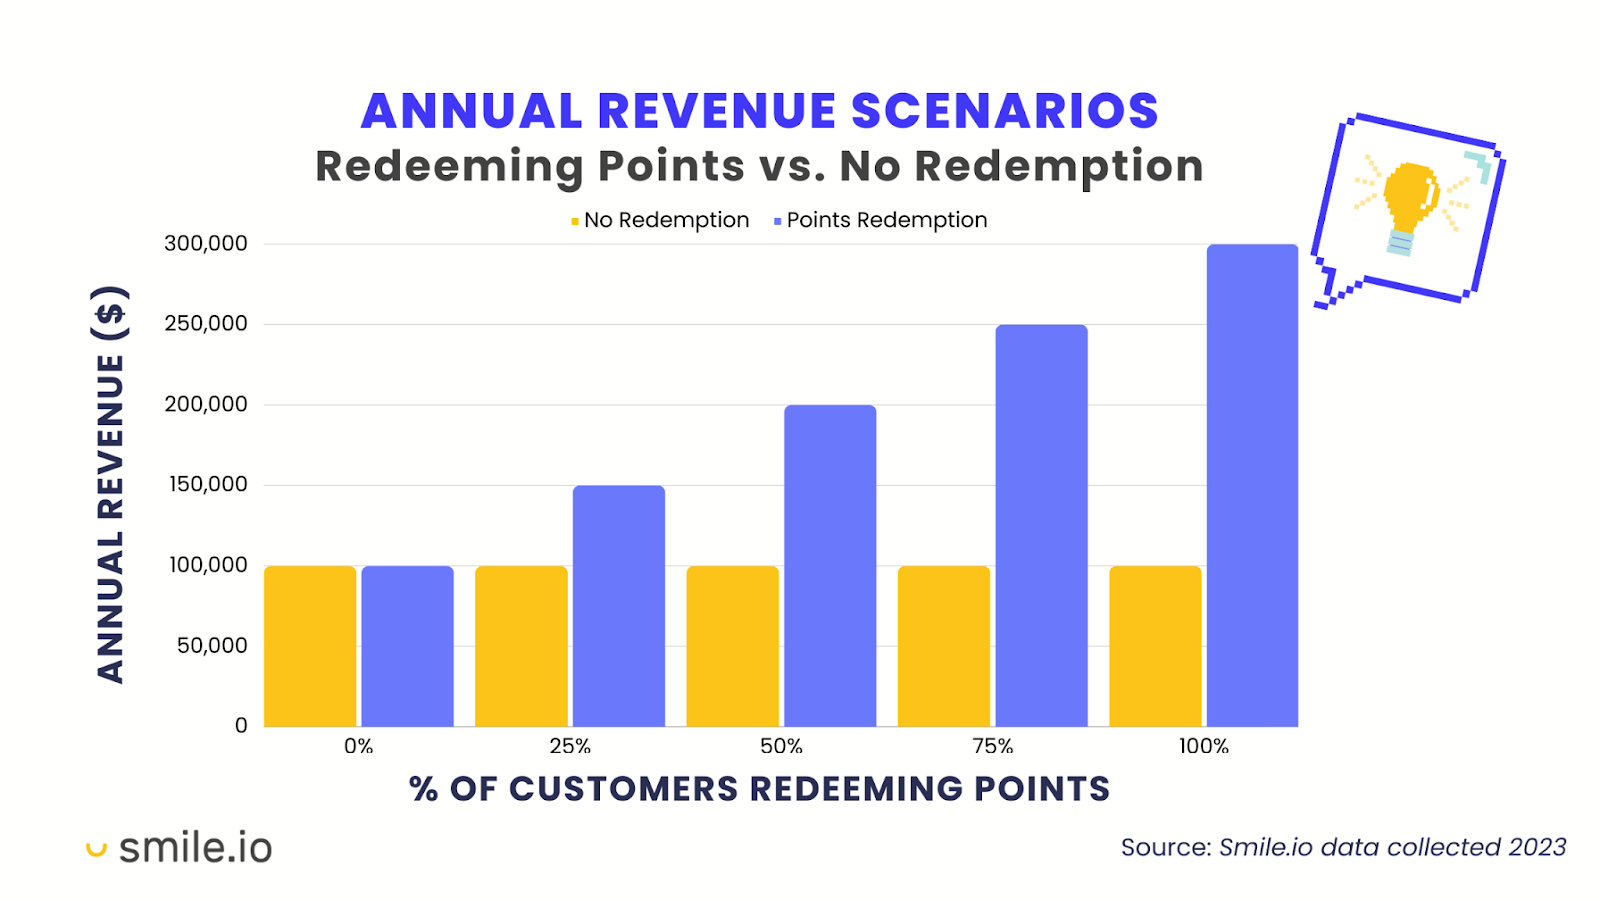 A bar graph showing the difference in annual revenue for customers who redeem points vs. those who don't based on different percentage scenarios of redeeming customers. 